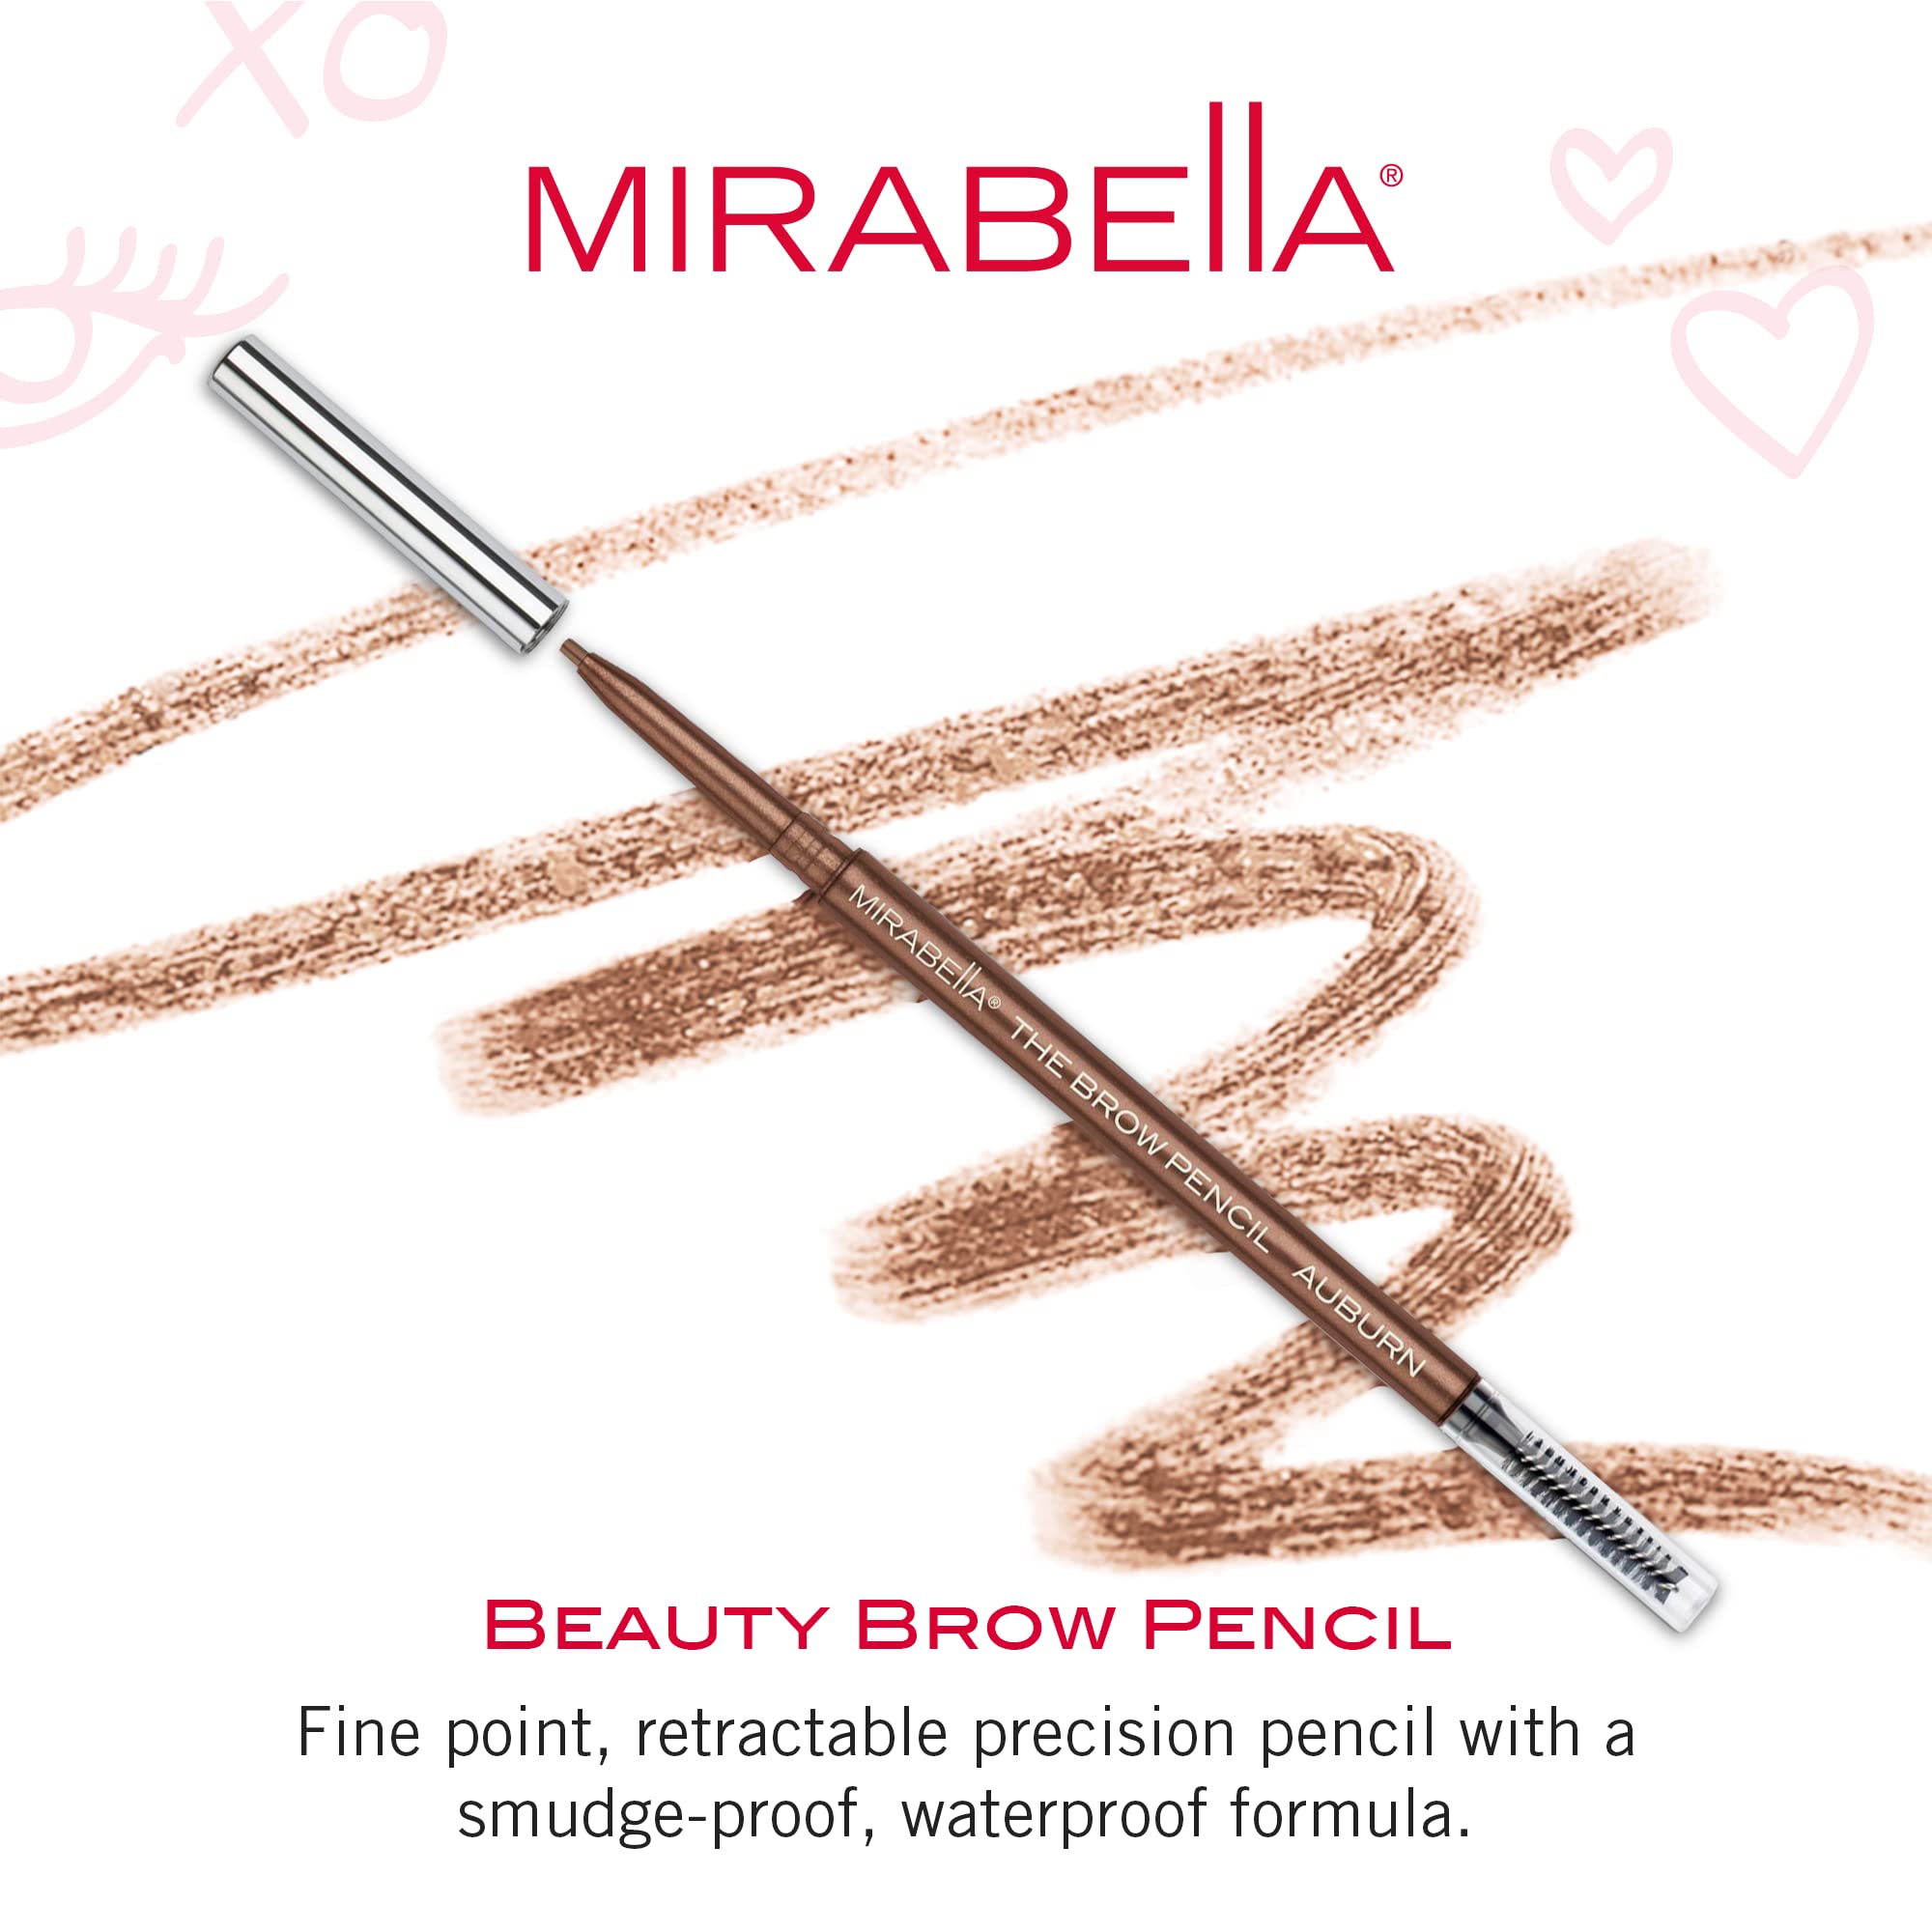 Mirabella Beauty Brow Pencil, Auburn - Ultra-Fine Point Precision Eyebrow Pencil - Rich Blendable Color Sculpts and Fill In Brows Naturally - Long-Lasting, Smudge-Proof and Waterproof Formula